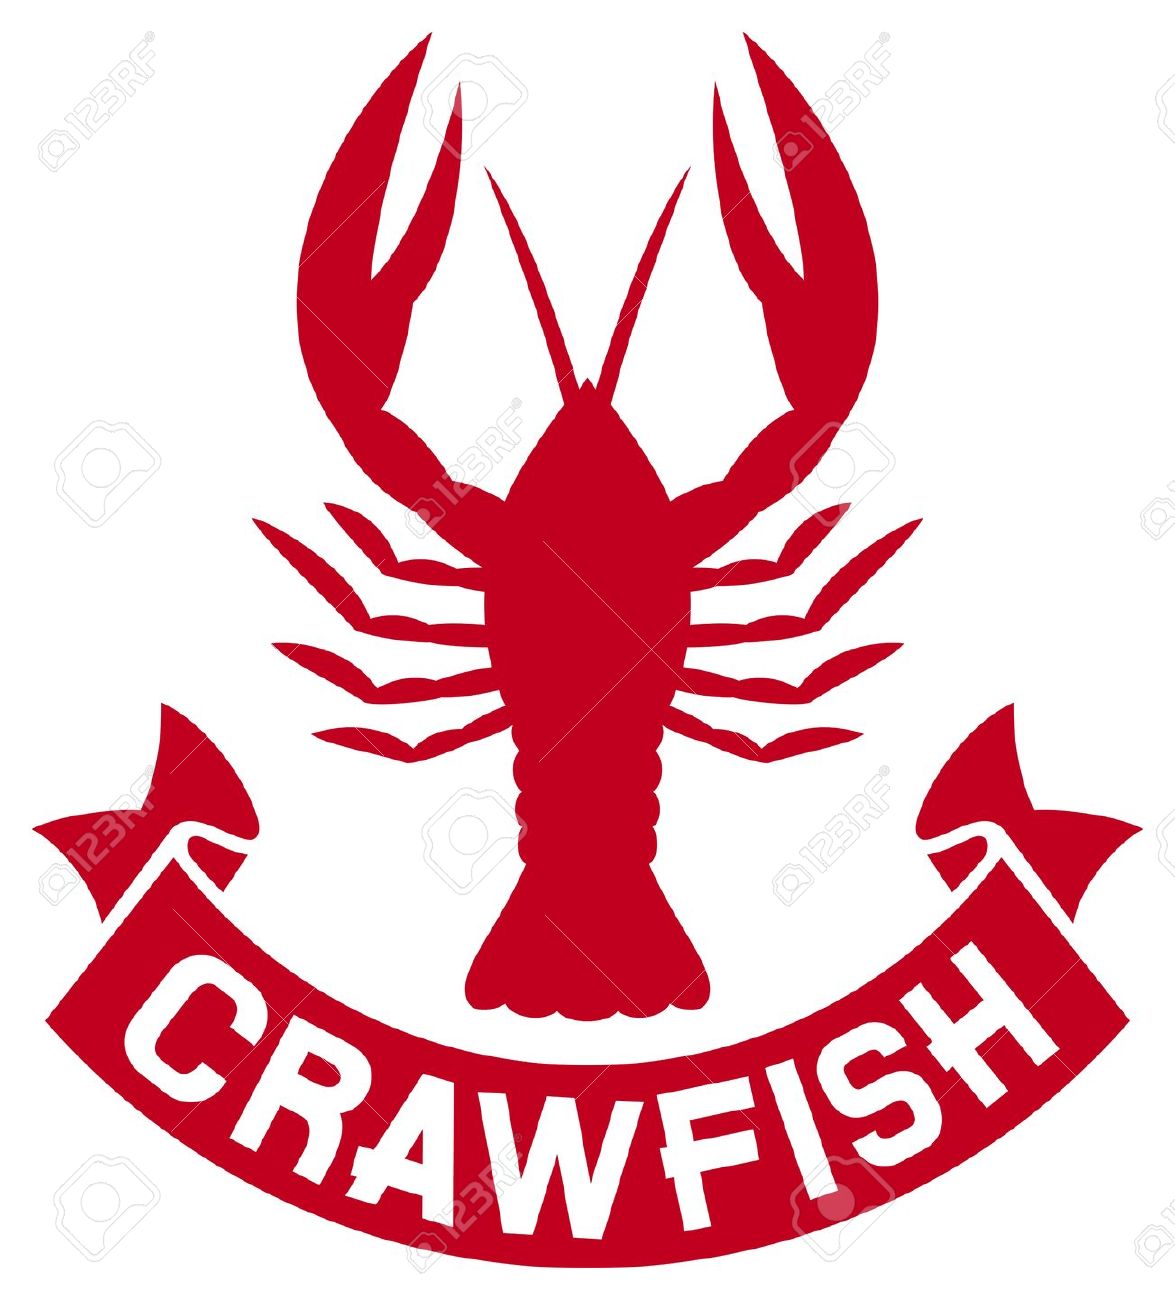 Vector image of Crayfish incl